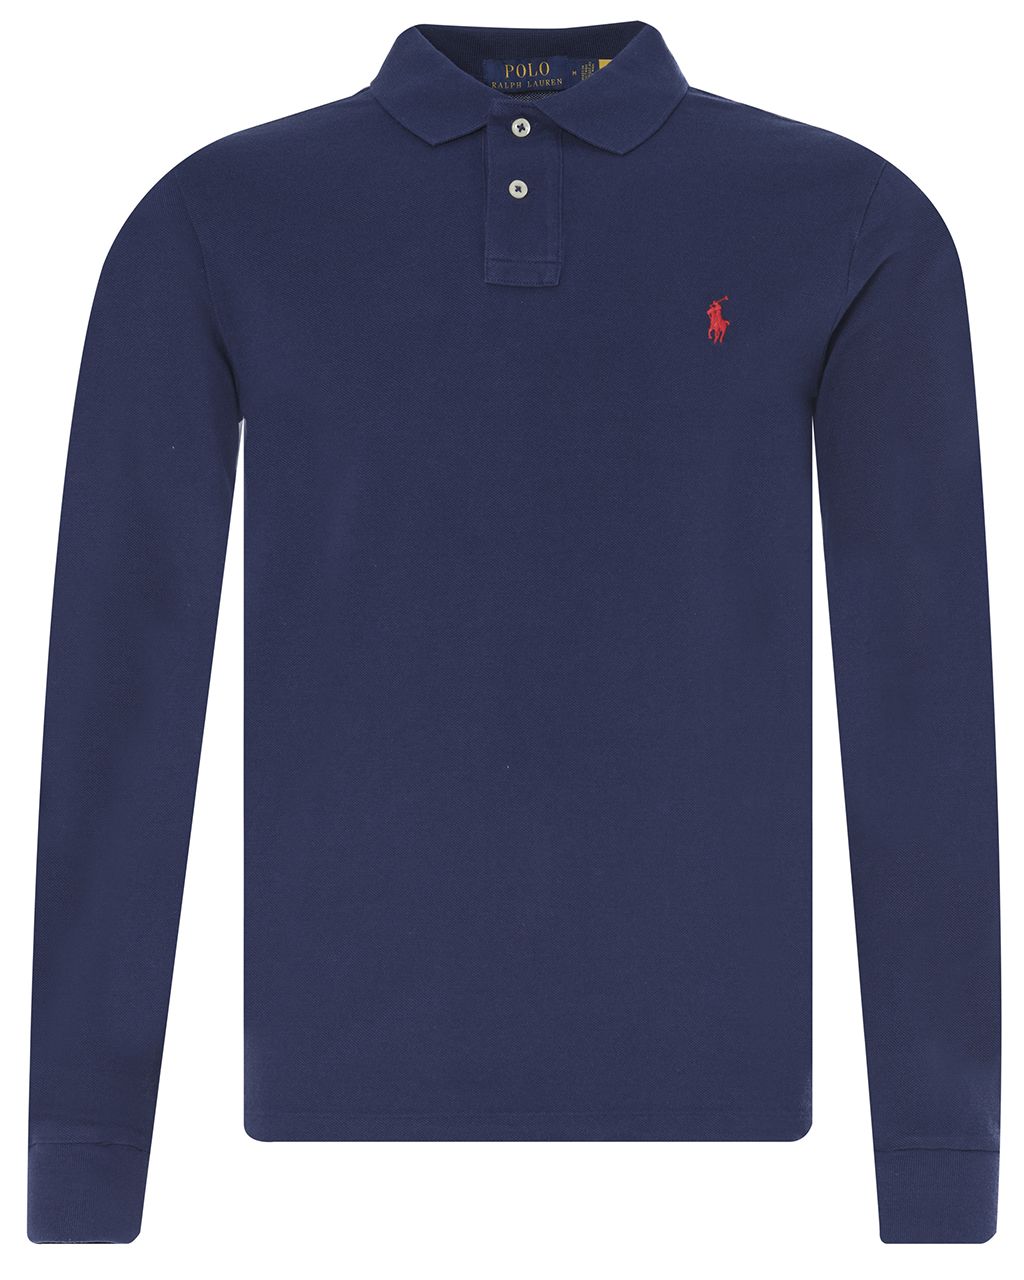 Polo Ralph Lauren Polo LM Donker blauw 078588-001-L